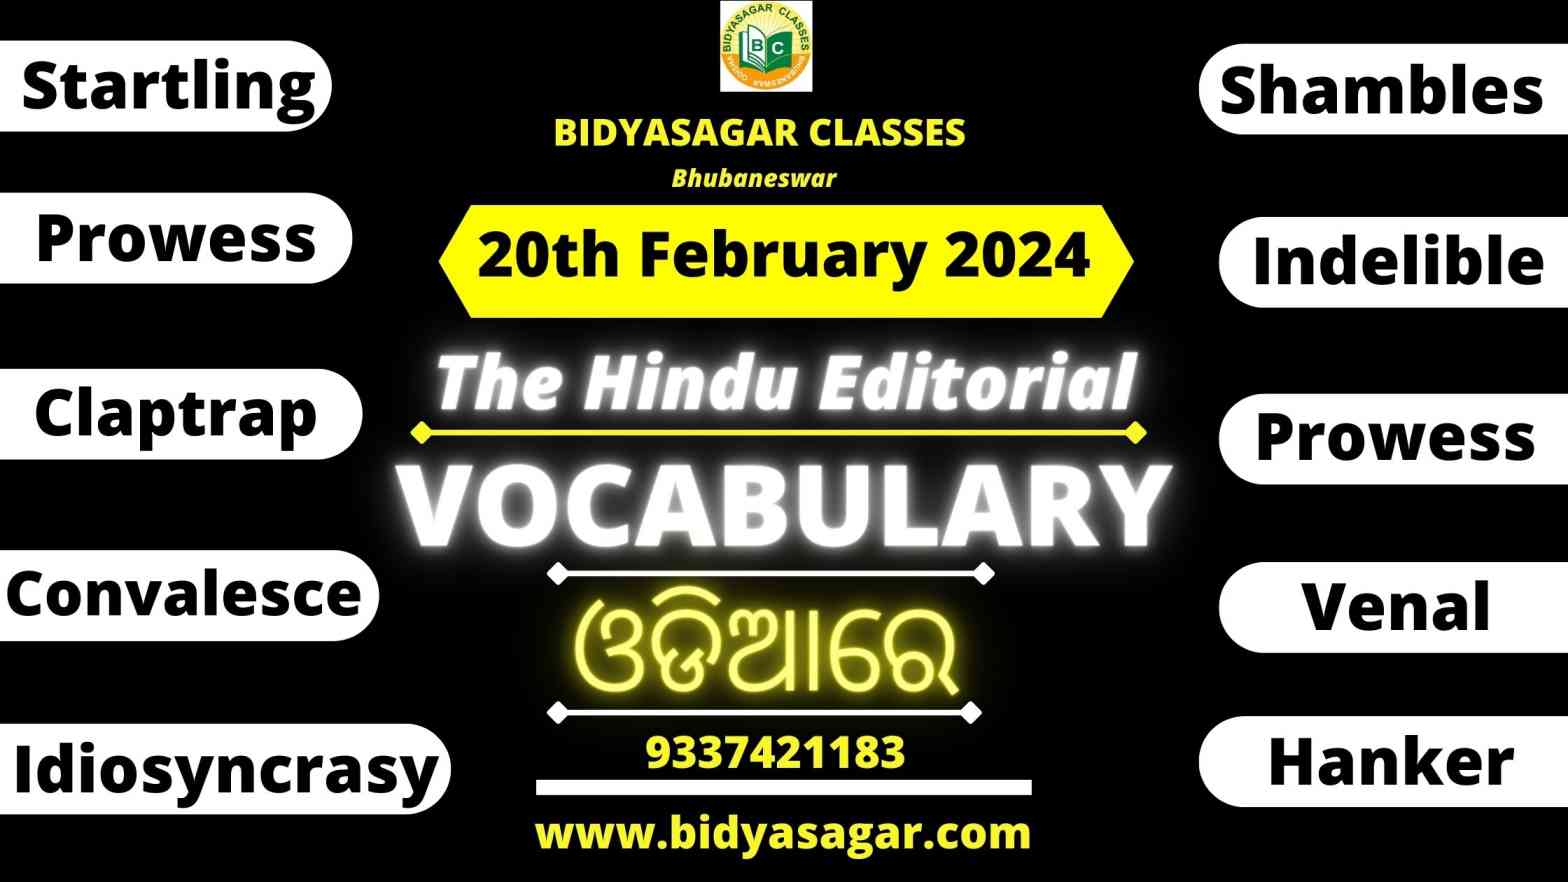 The Hindu Editorial Vocabulary of 20th February 2024